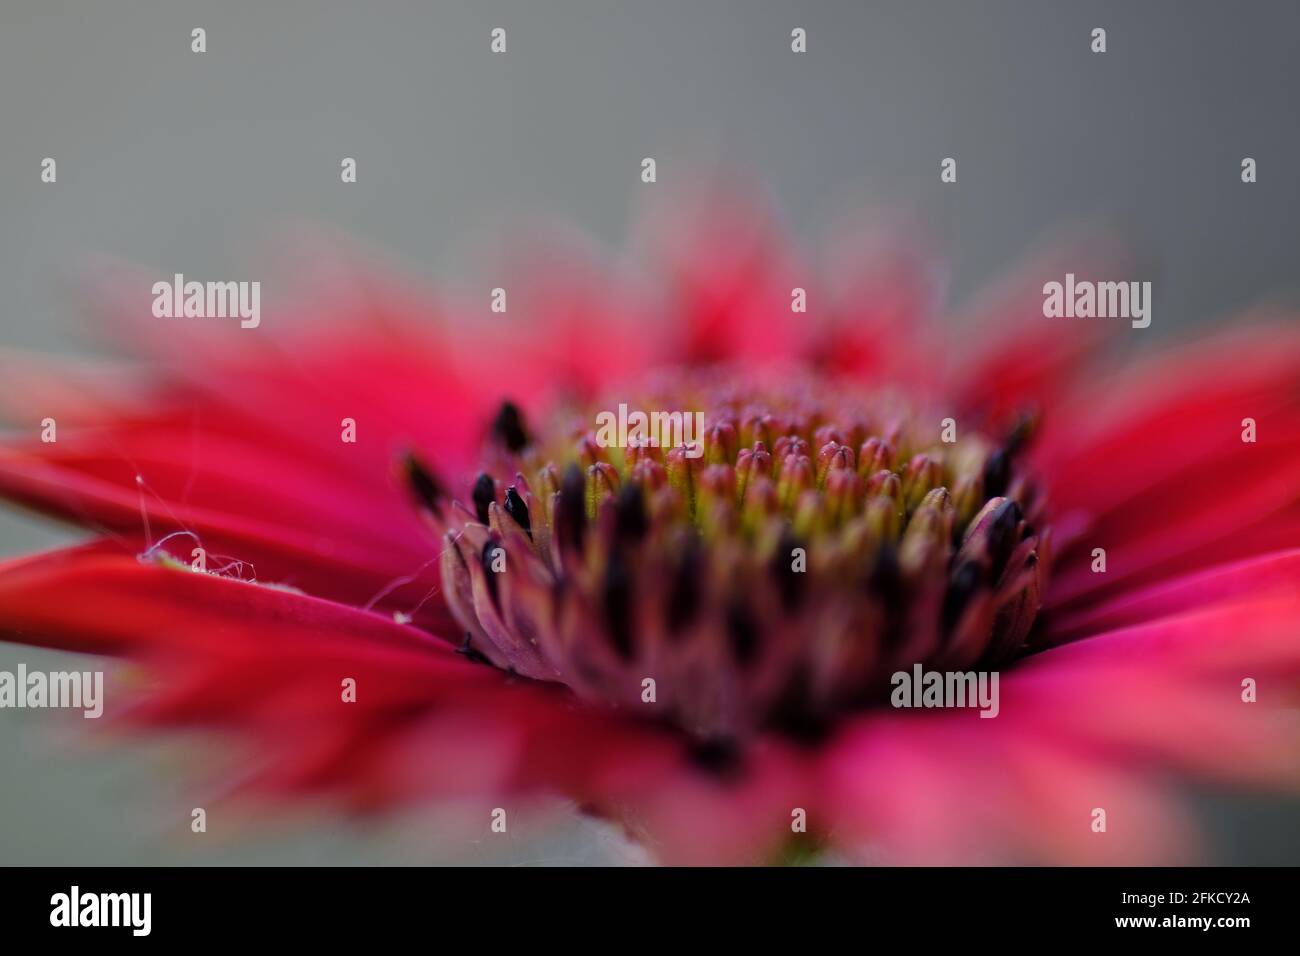 Close up of a red osteospermum flower, also known as African Daisy Stock Photo